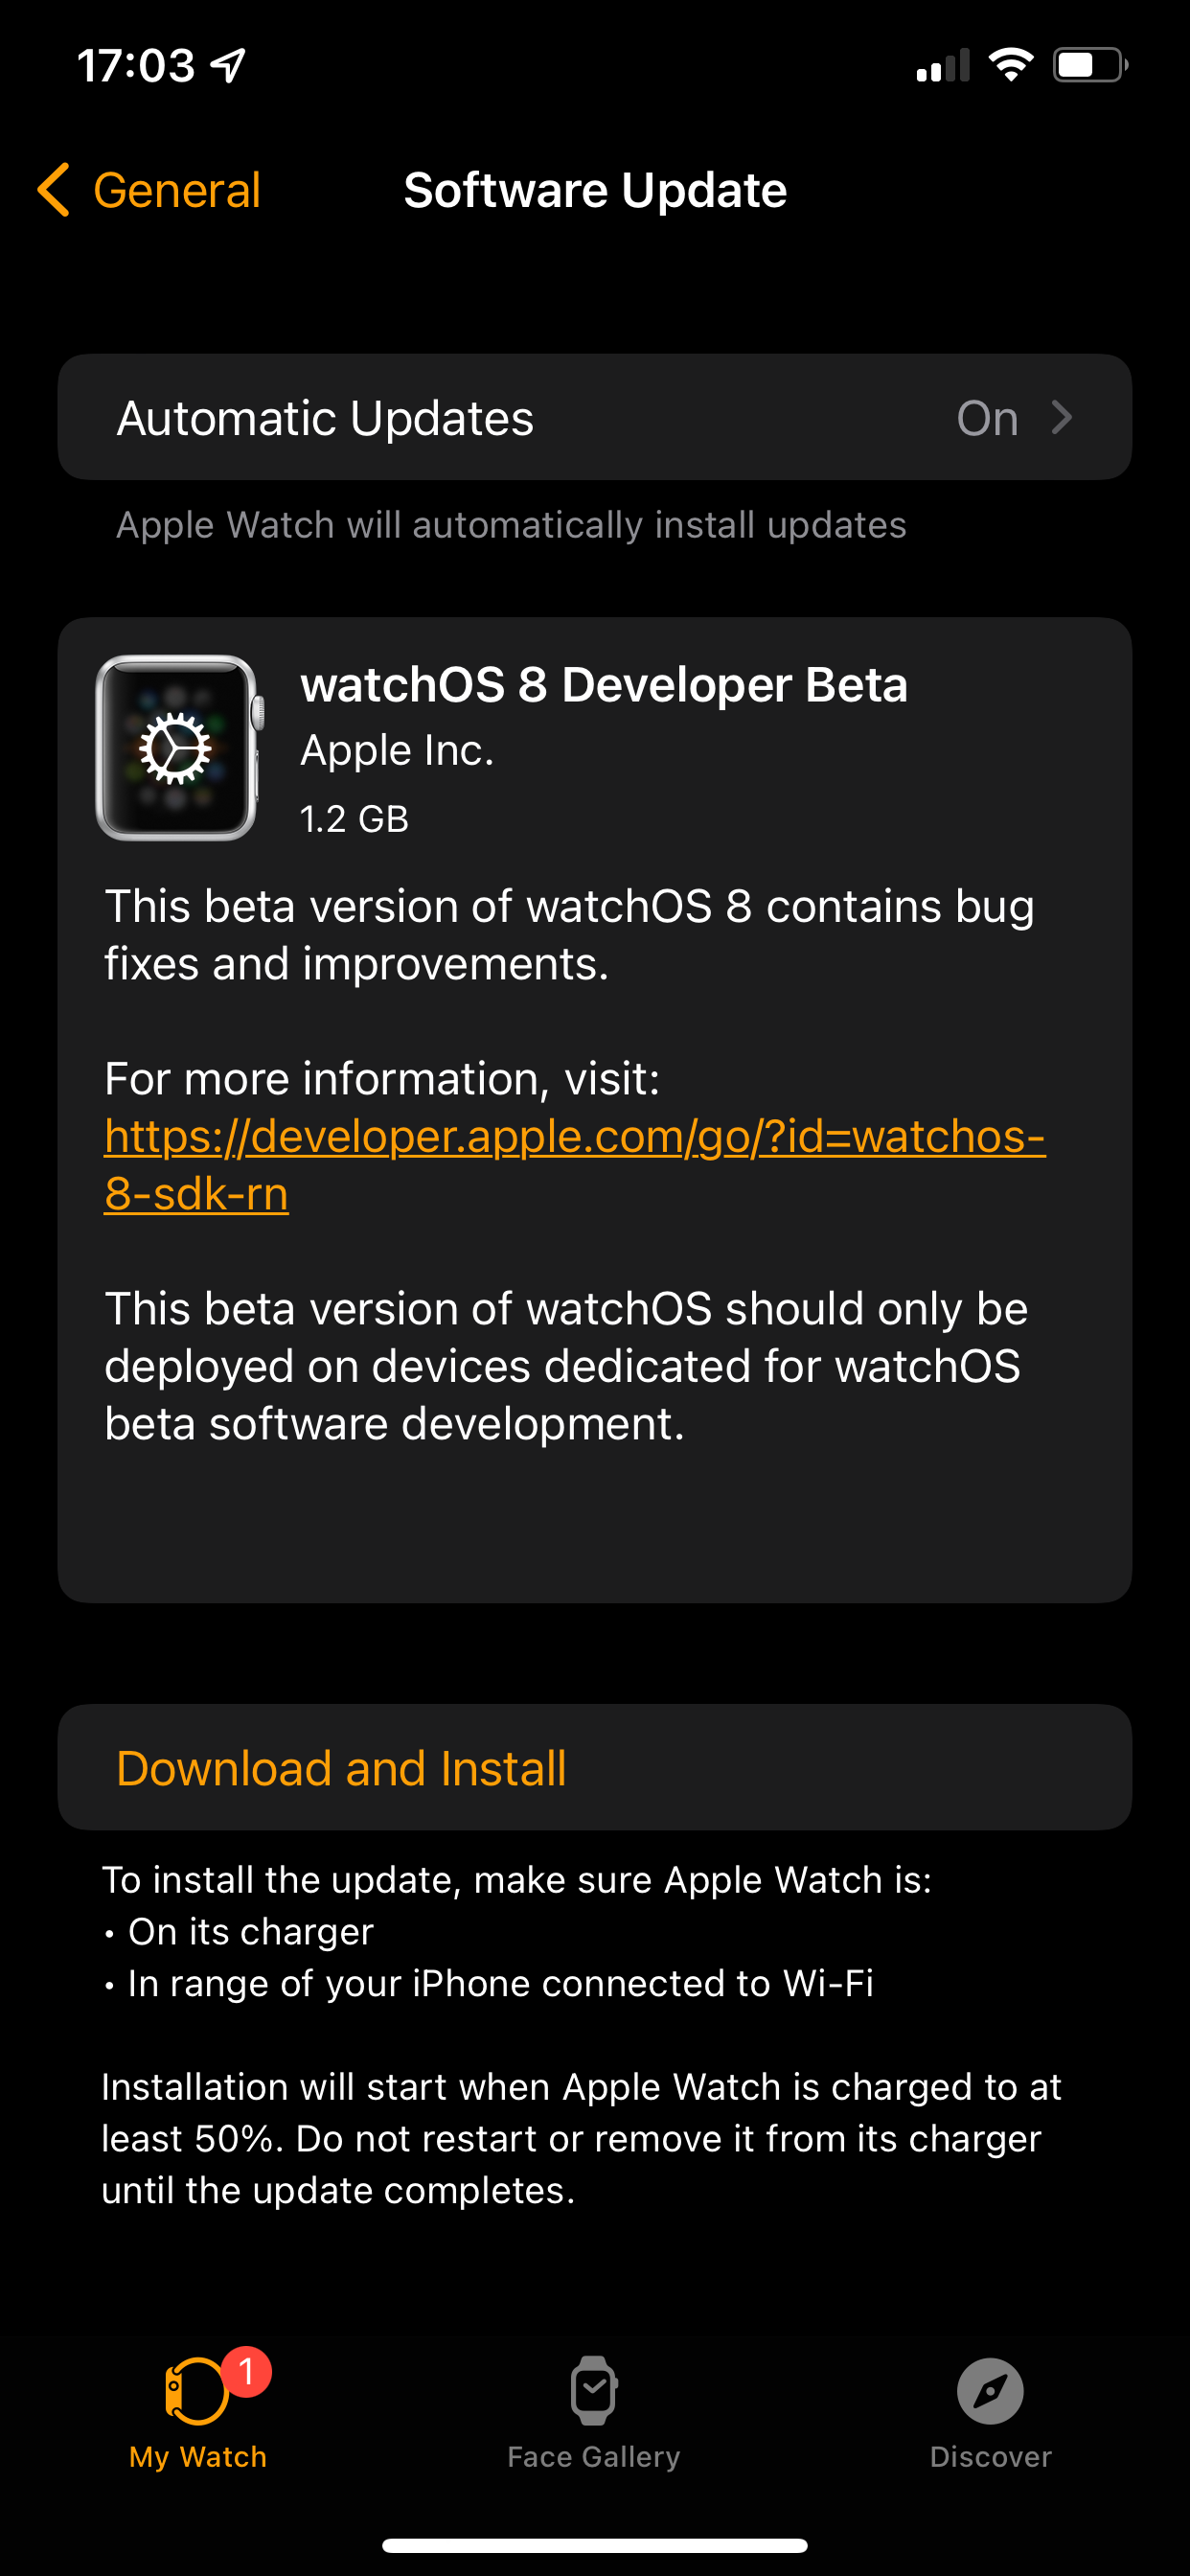 The Software Update page in the Watch app on iPhone